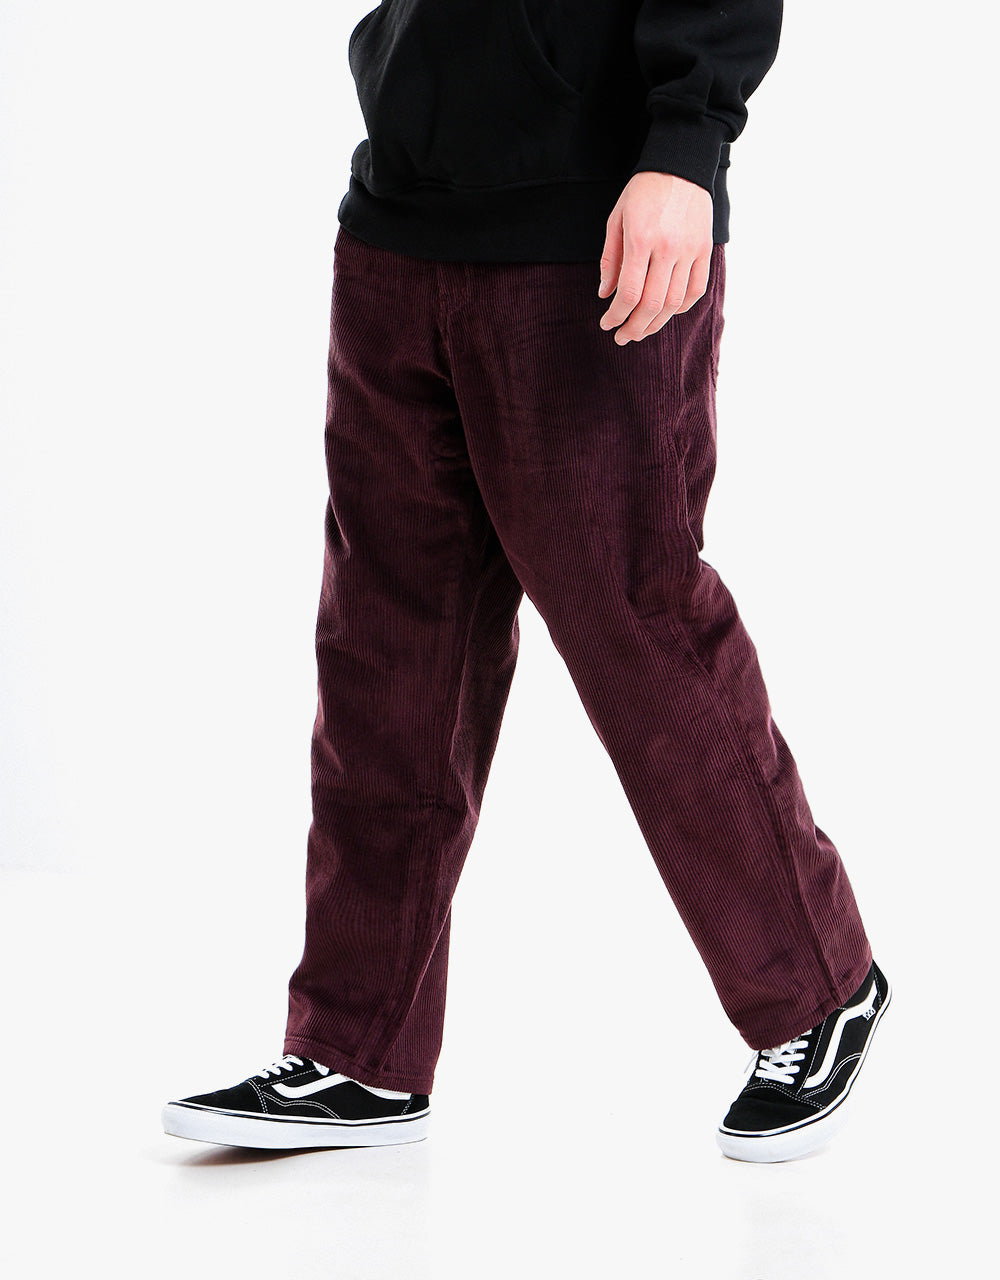 Butter Goods High Wale Cord Baggy Work Pant - Dusty Plum